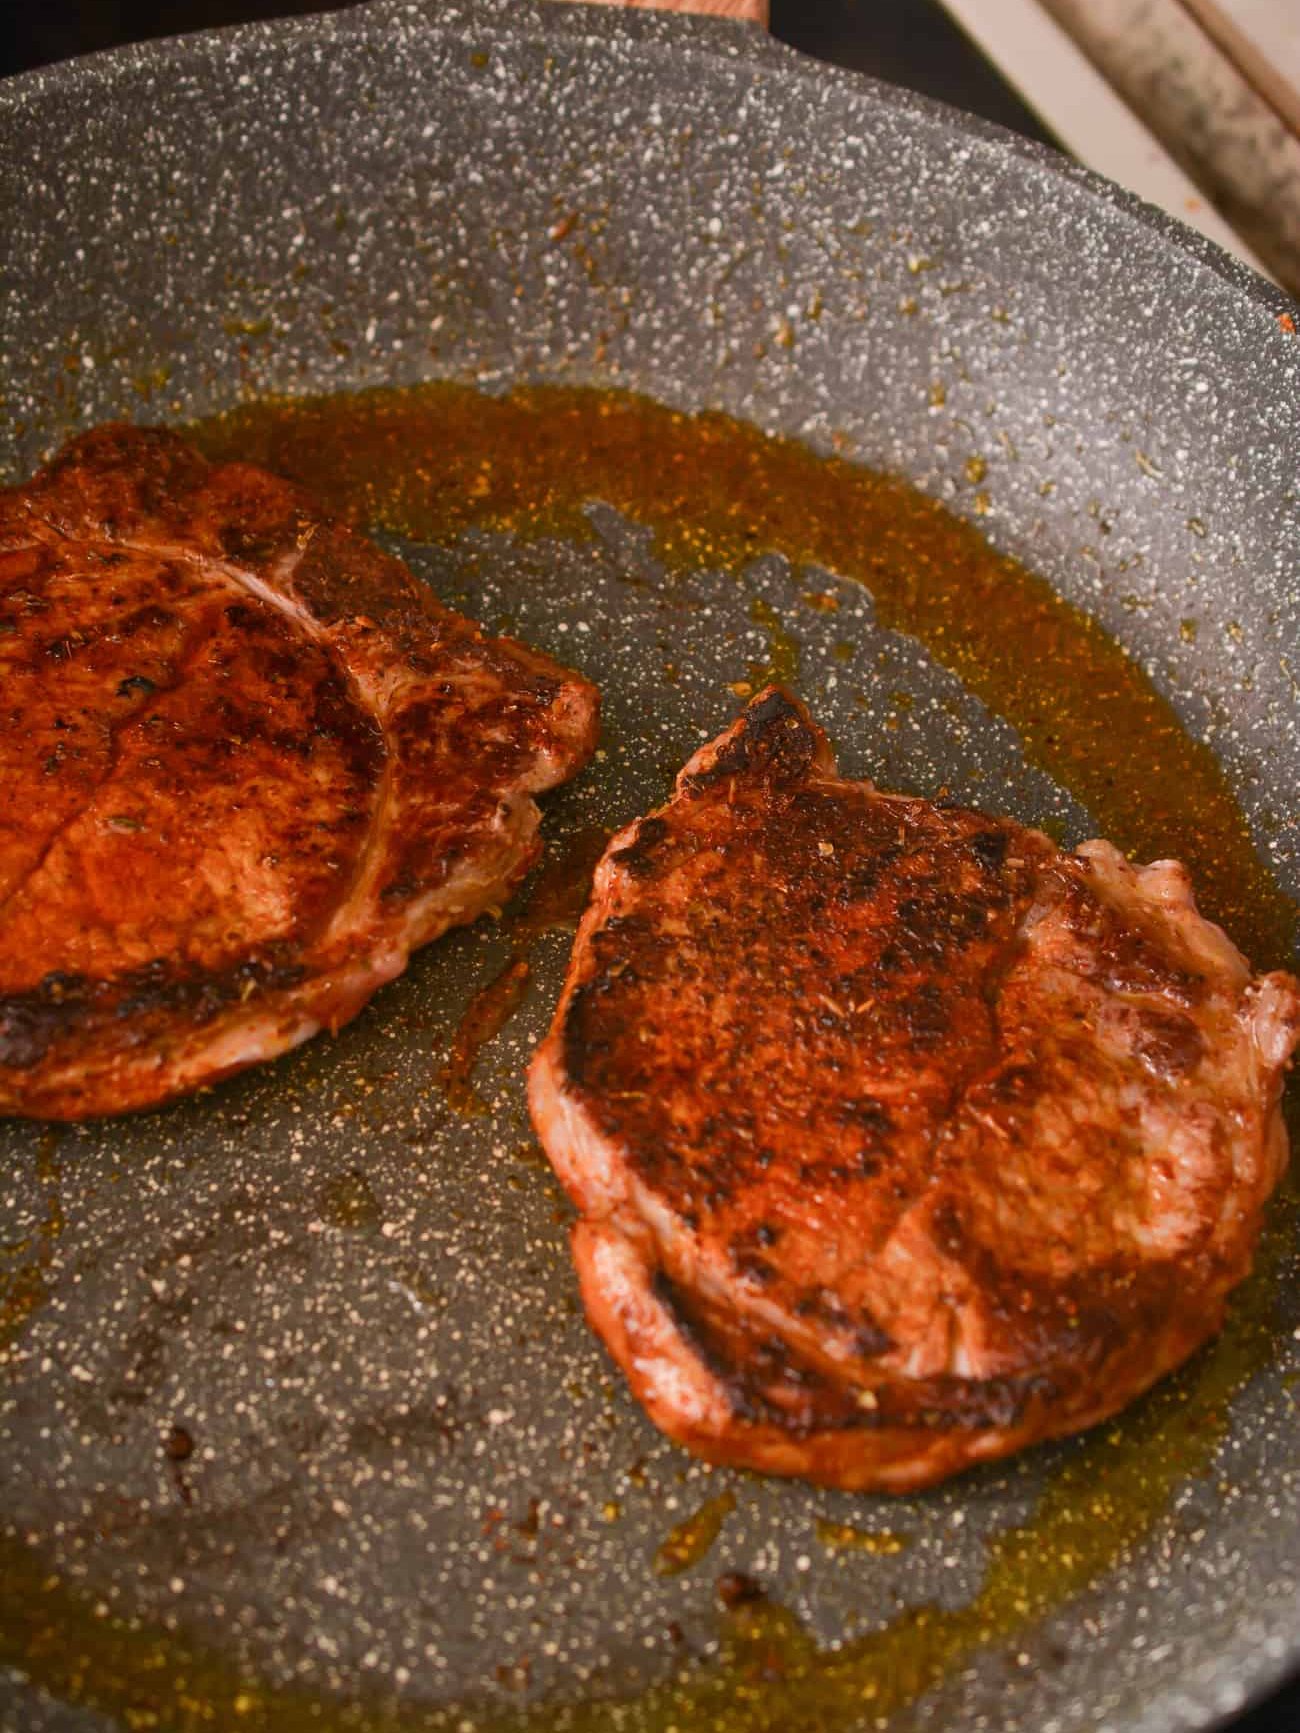 Heat some oil in a skillet over medium-high heat and cook the steak until done to your liking. Let rest, and then cut into pieces.